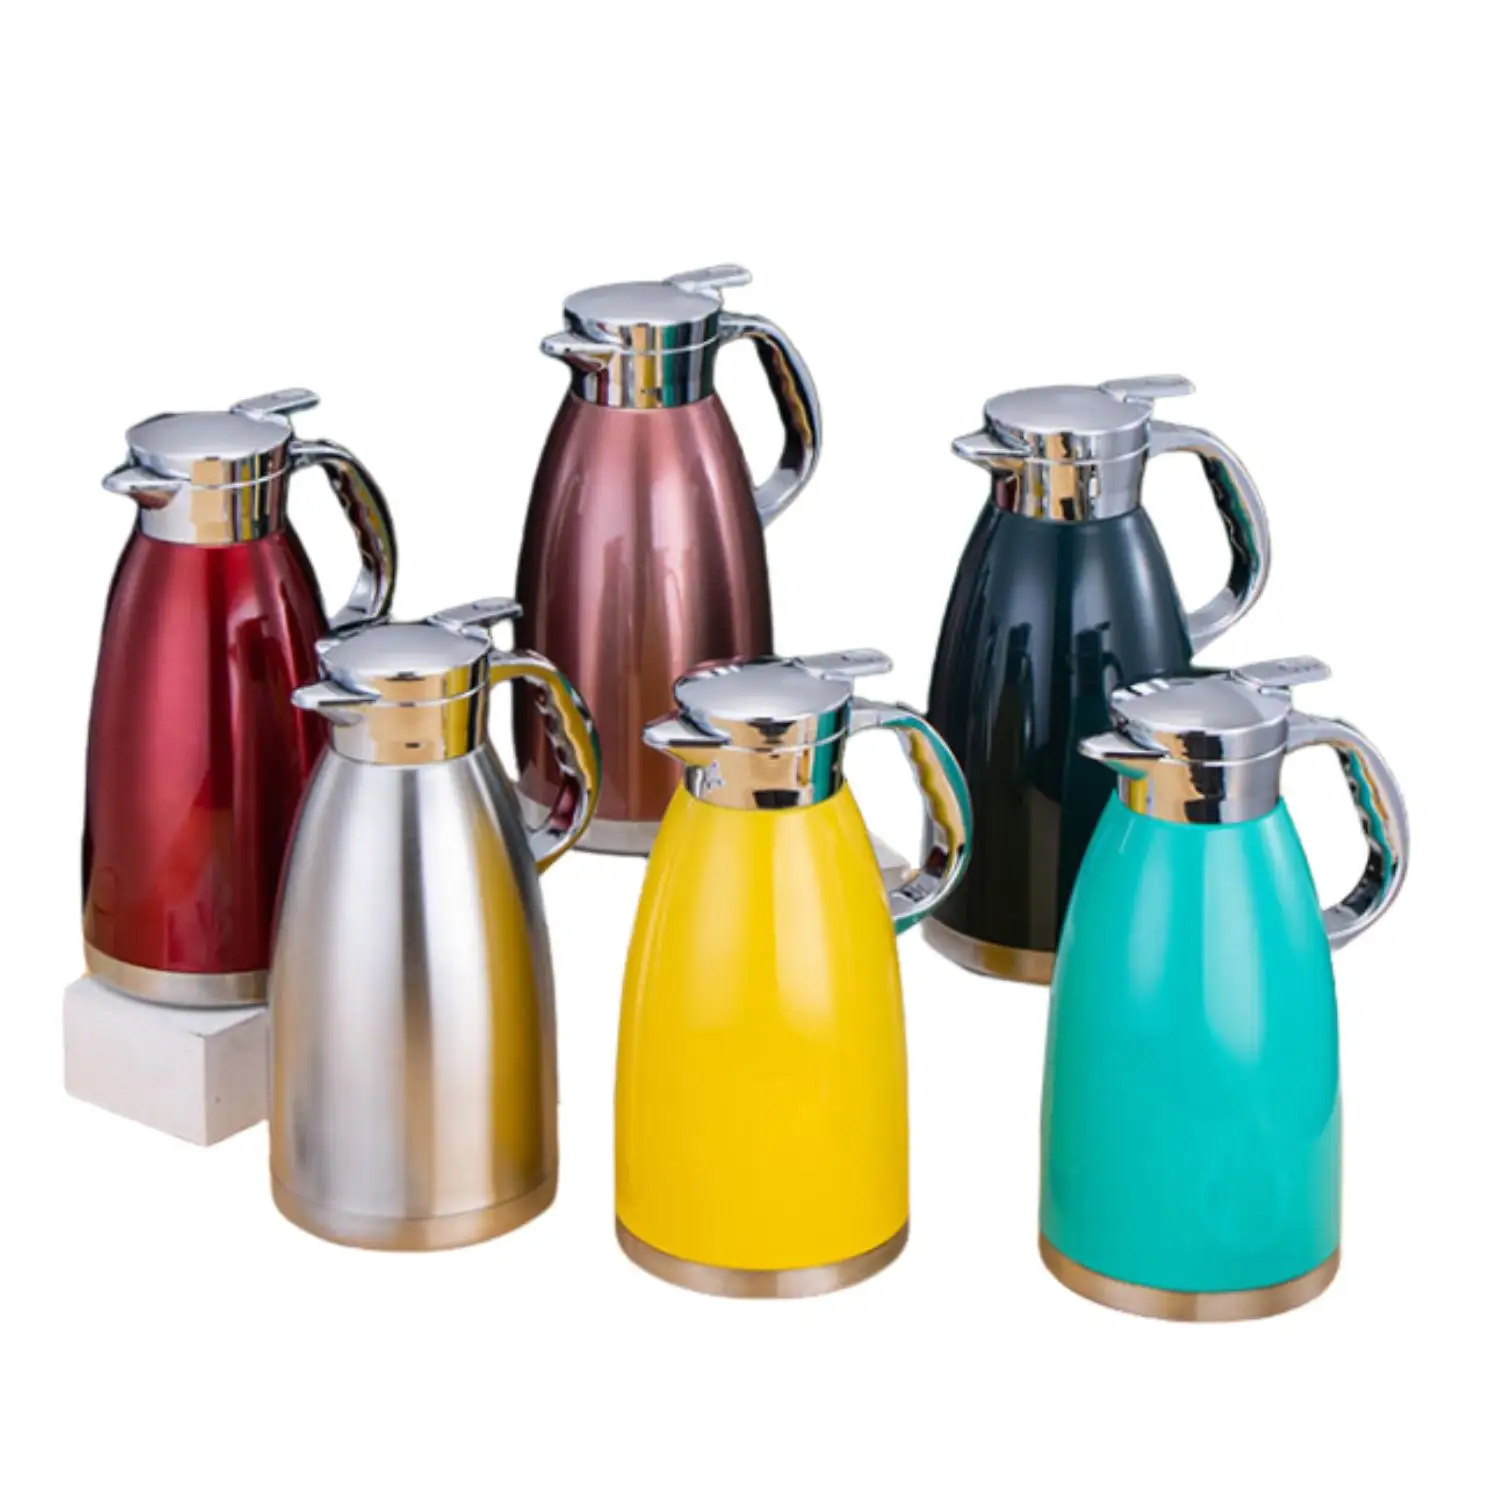 Water Jug Thermal Insulated Pots Restaurant Insulated Stainless Steel 2l Hot Tea Water Bottle Thermos Kettle Vacuum Flask